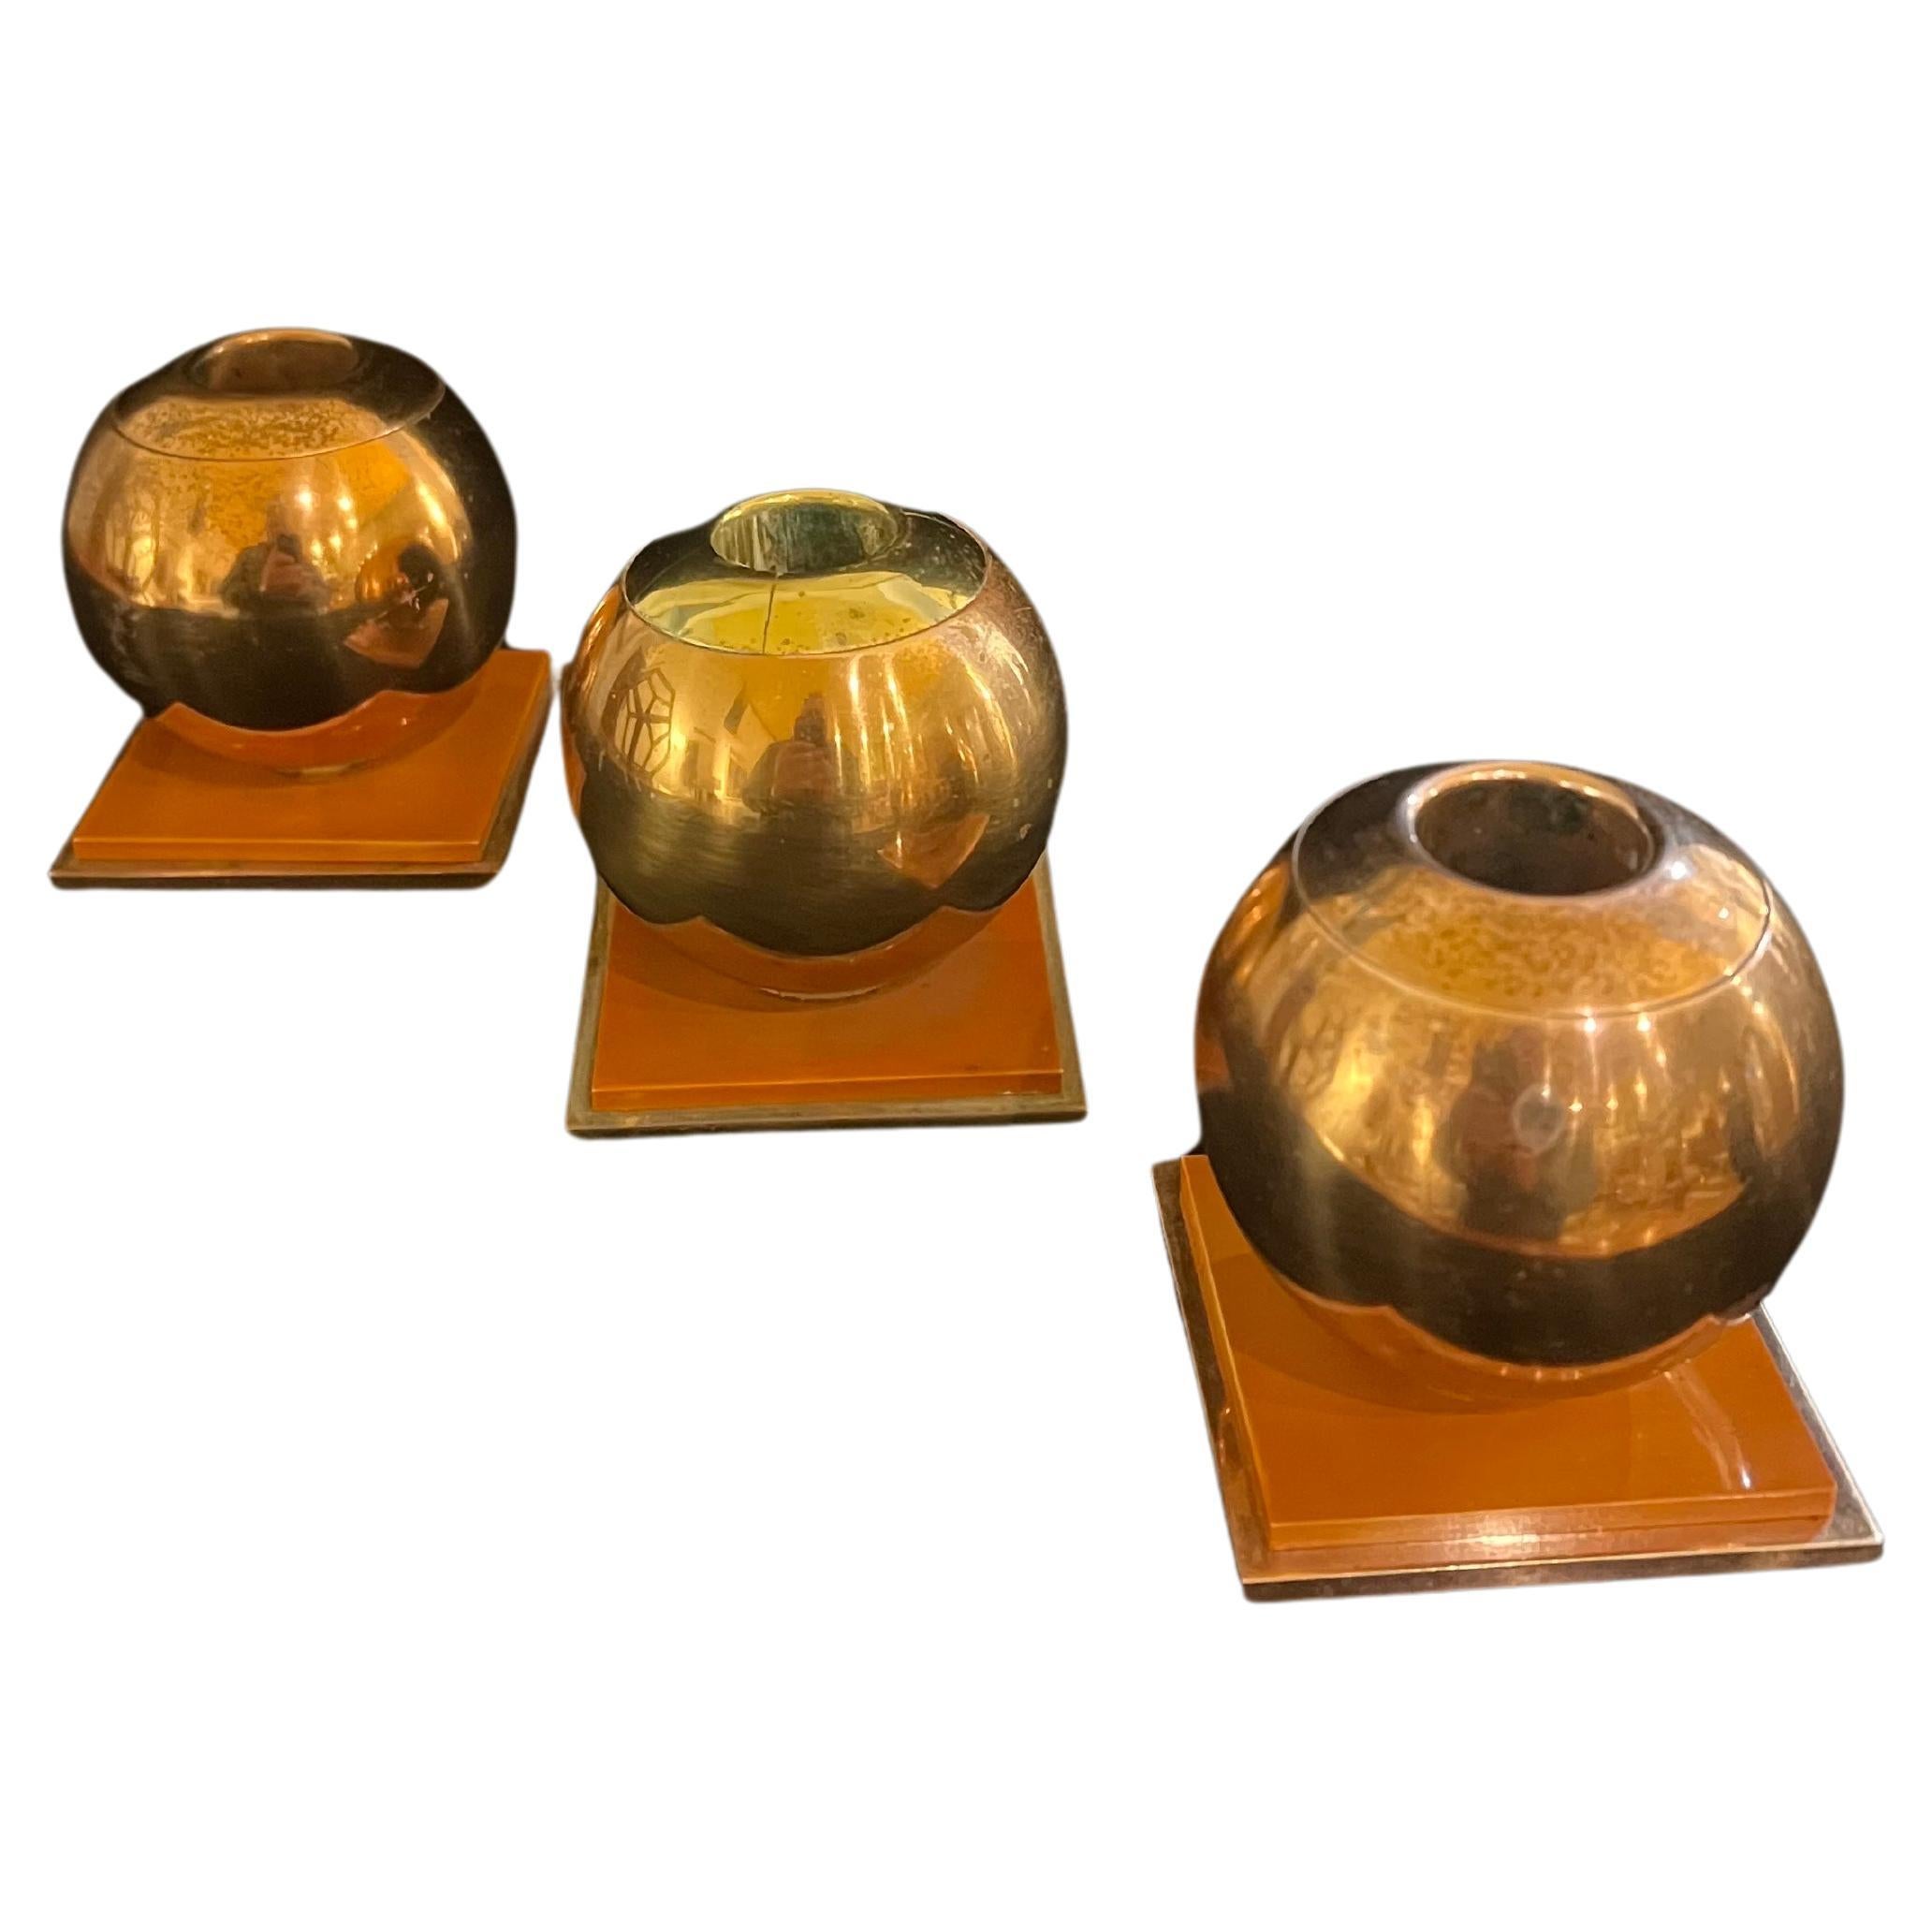 American Art Deco Set of 3 Candle Holders by Russel Wright for Chase In Good Condition For Sale In San Diego, CA